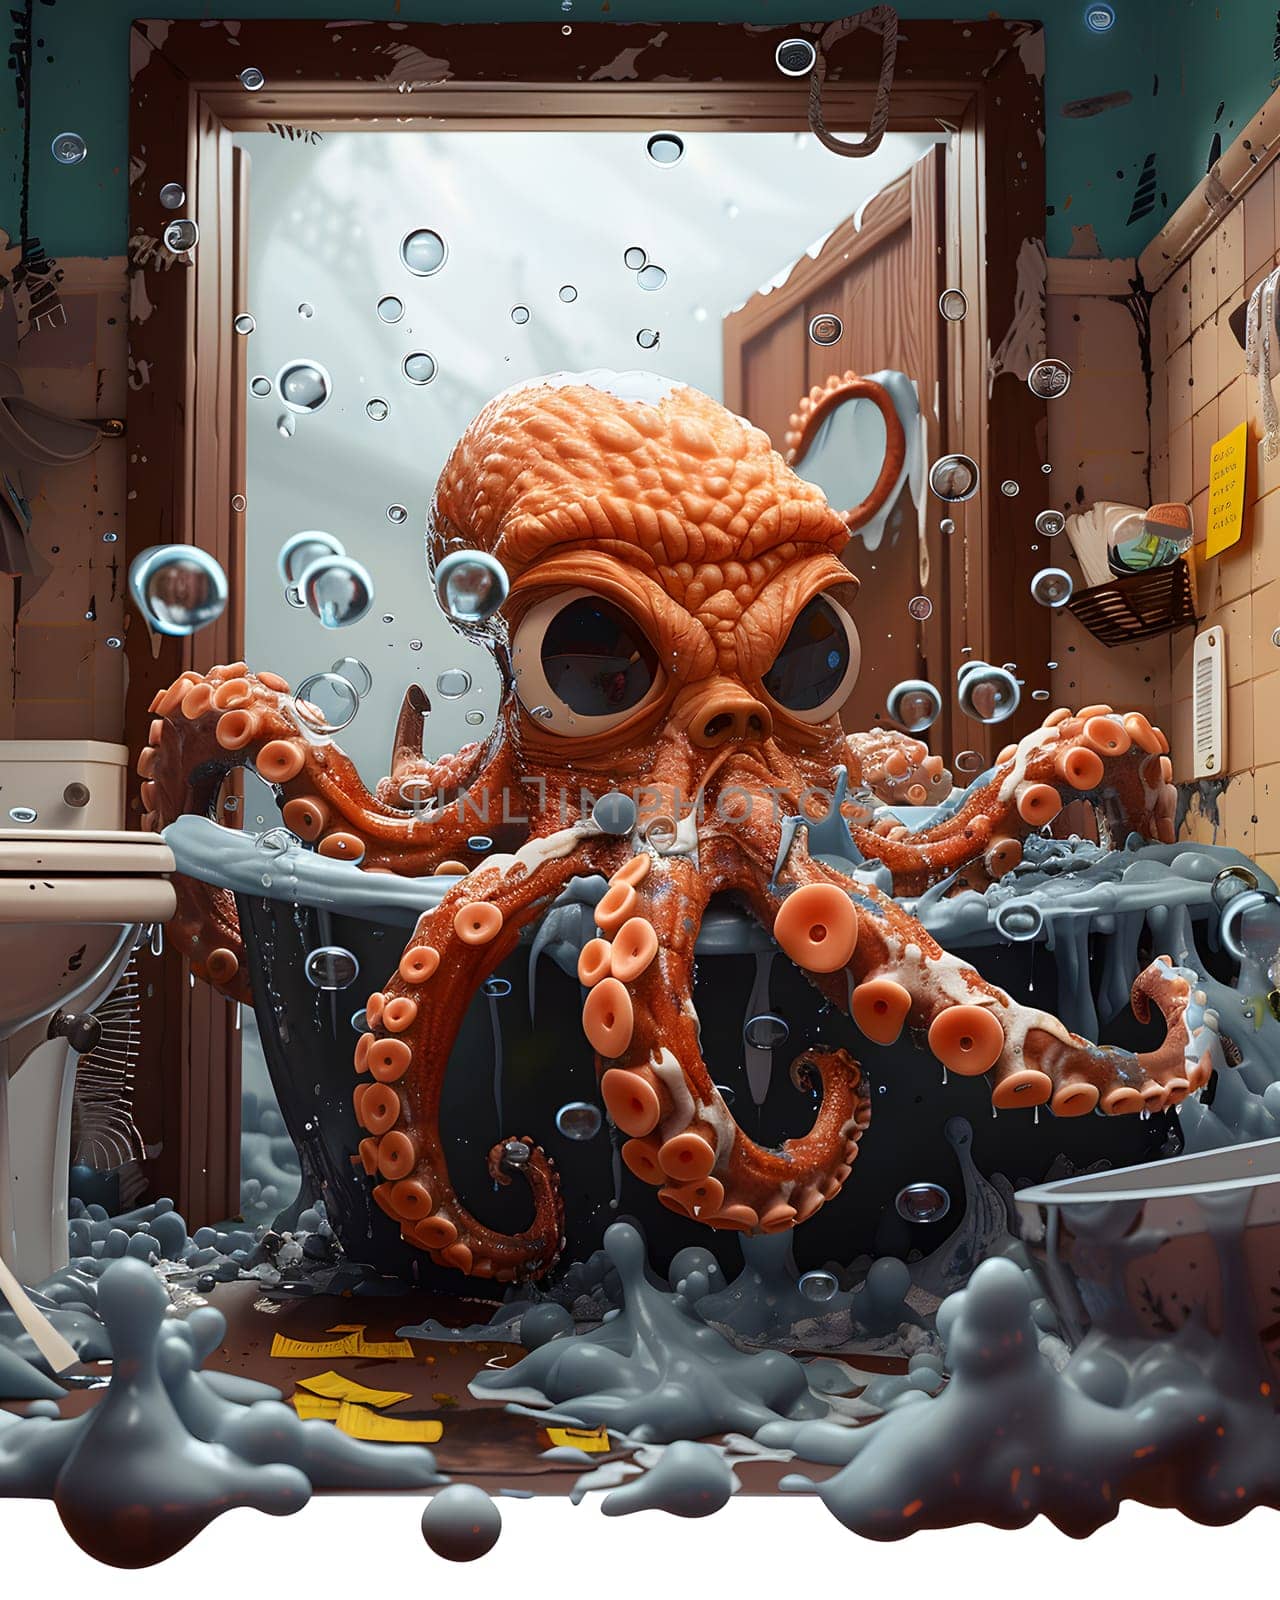 A cephalopod known as the giant Pacific octopus is depicted sitting in a bathtub with bubbles emanating from its mouth in a visually stunning marine invertebratethemed painting